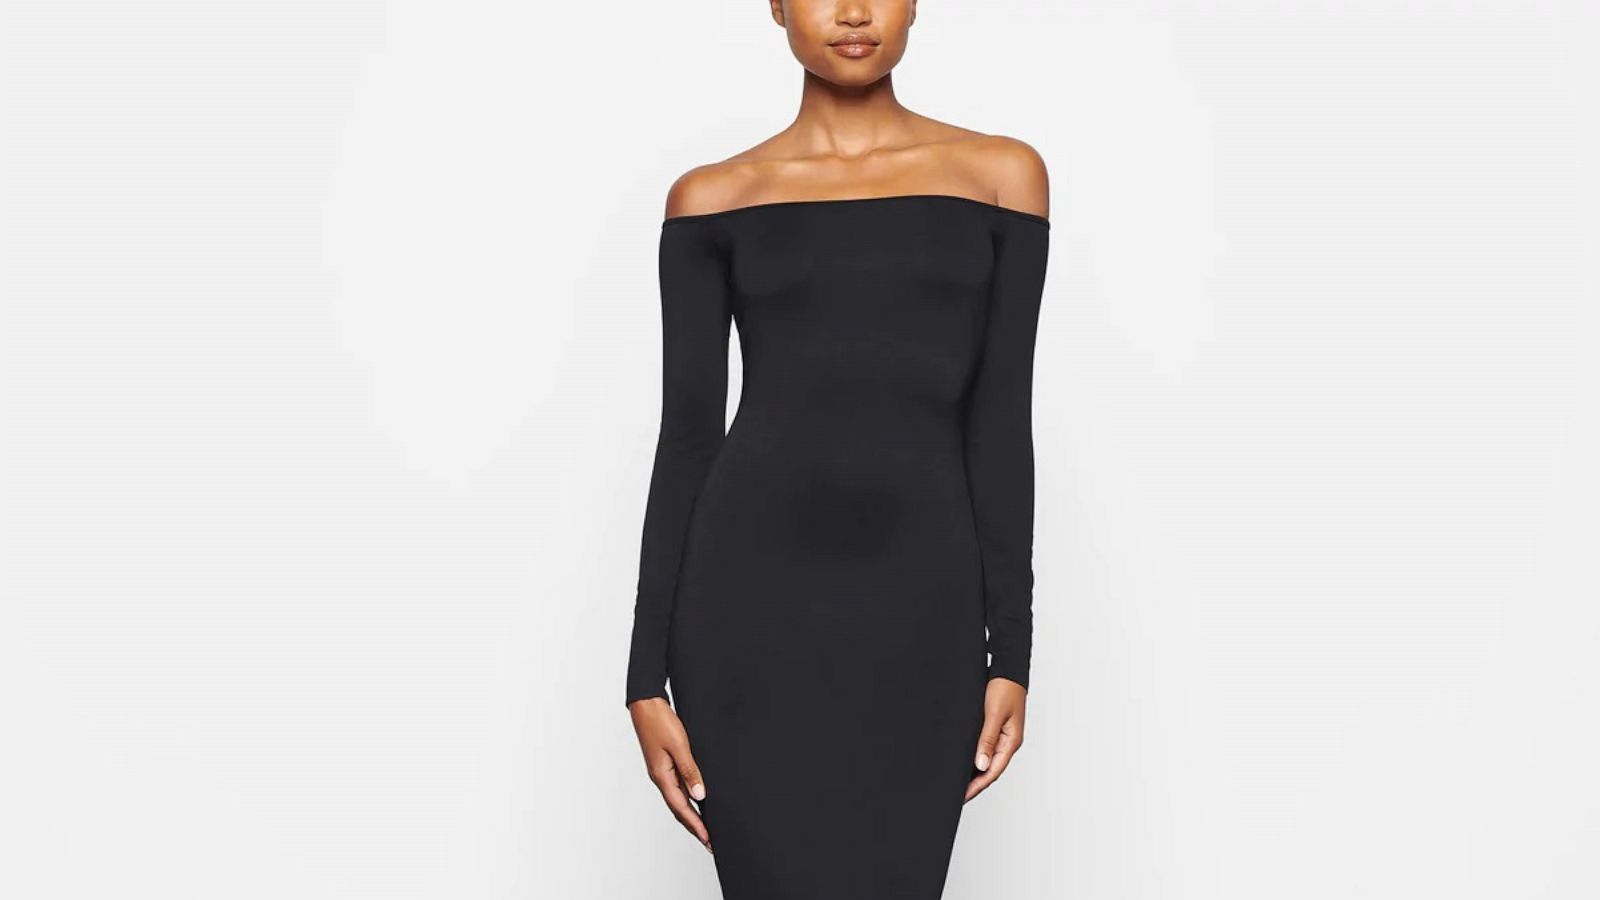 I'm 5'1 and weigh 115 lbs – I tried the viral dress from Kim